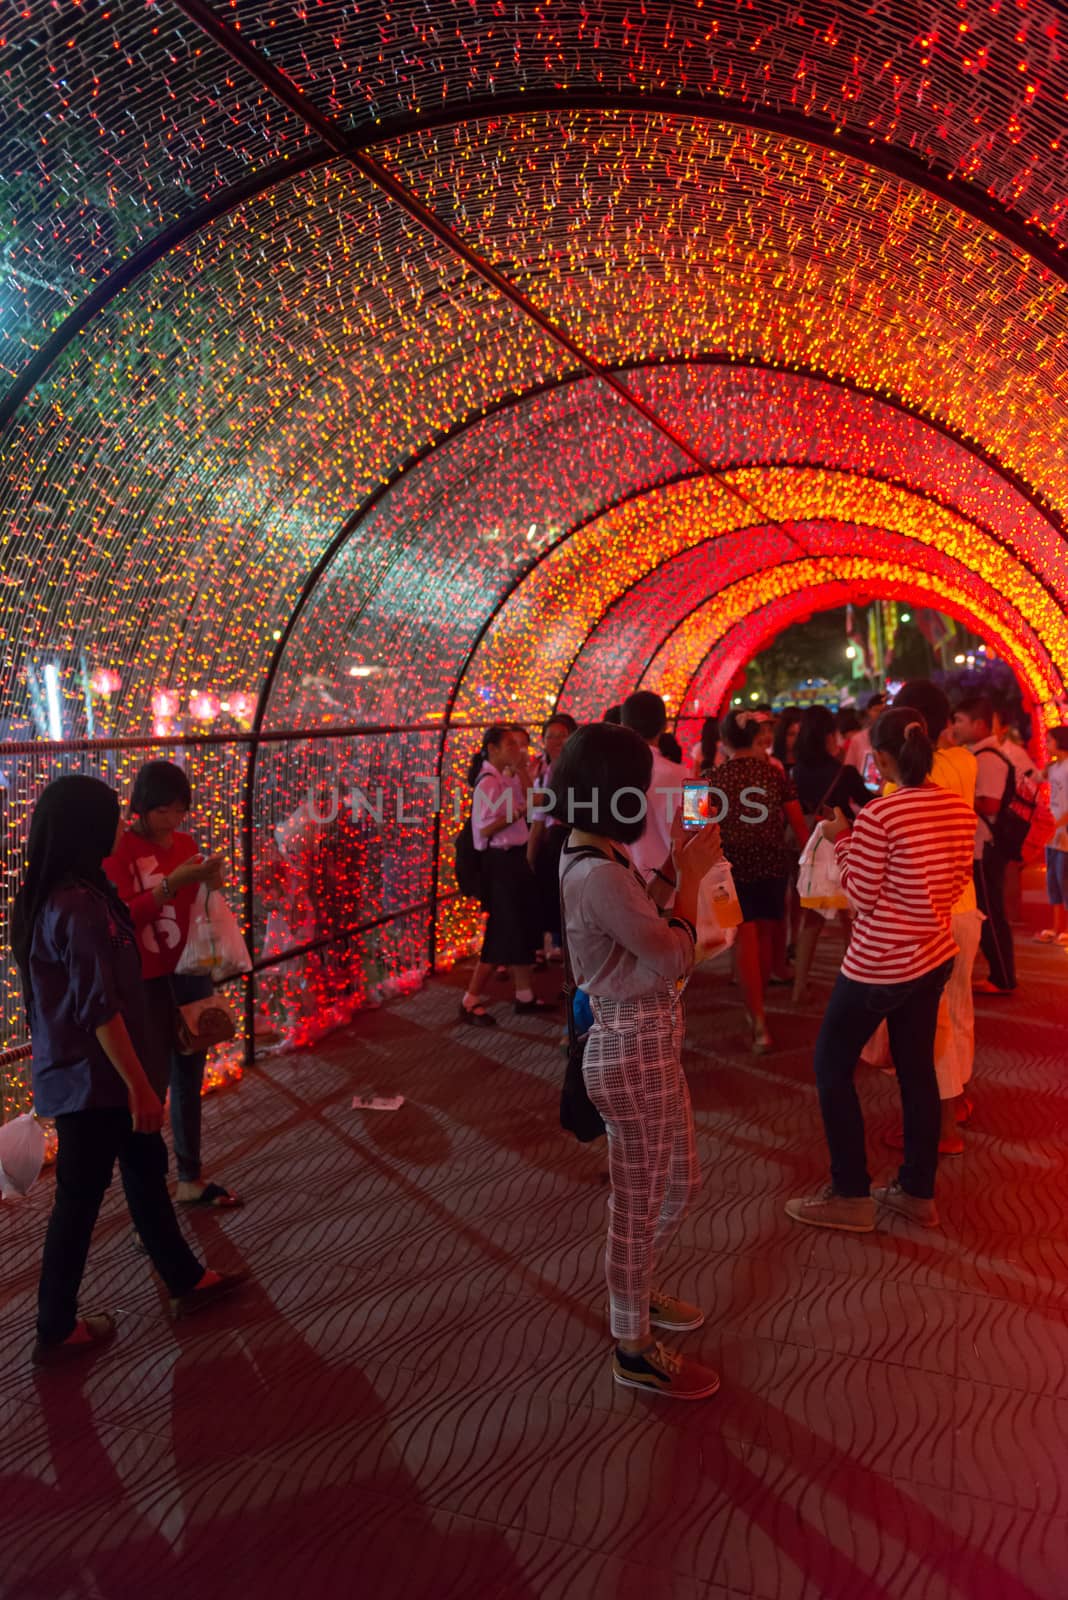 PHUKET, THAILAND - 07 FEB 2014: Unidentified people walk in red bright illuminated arch during annual old Phuket town festival at night. 